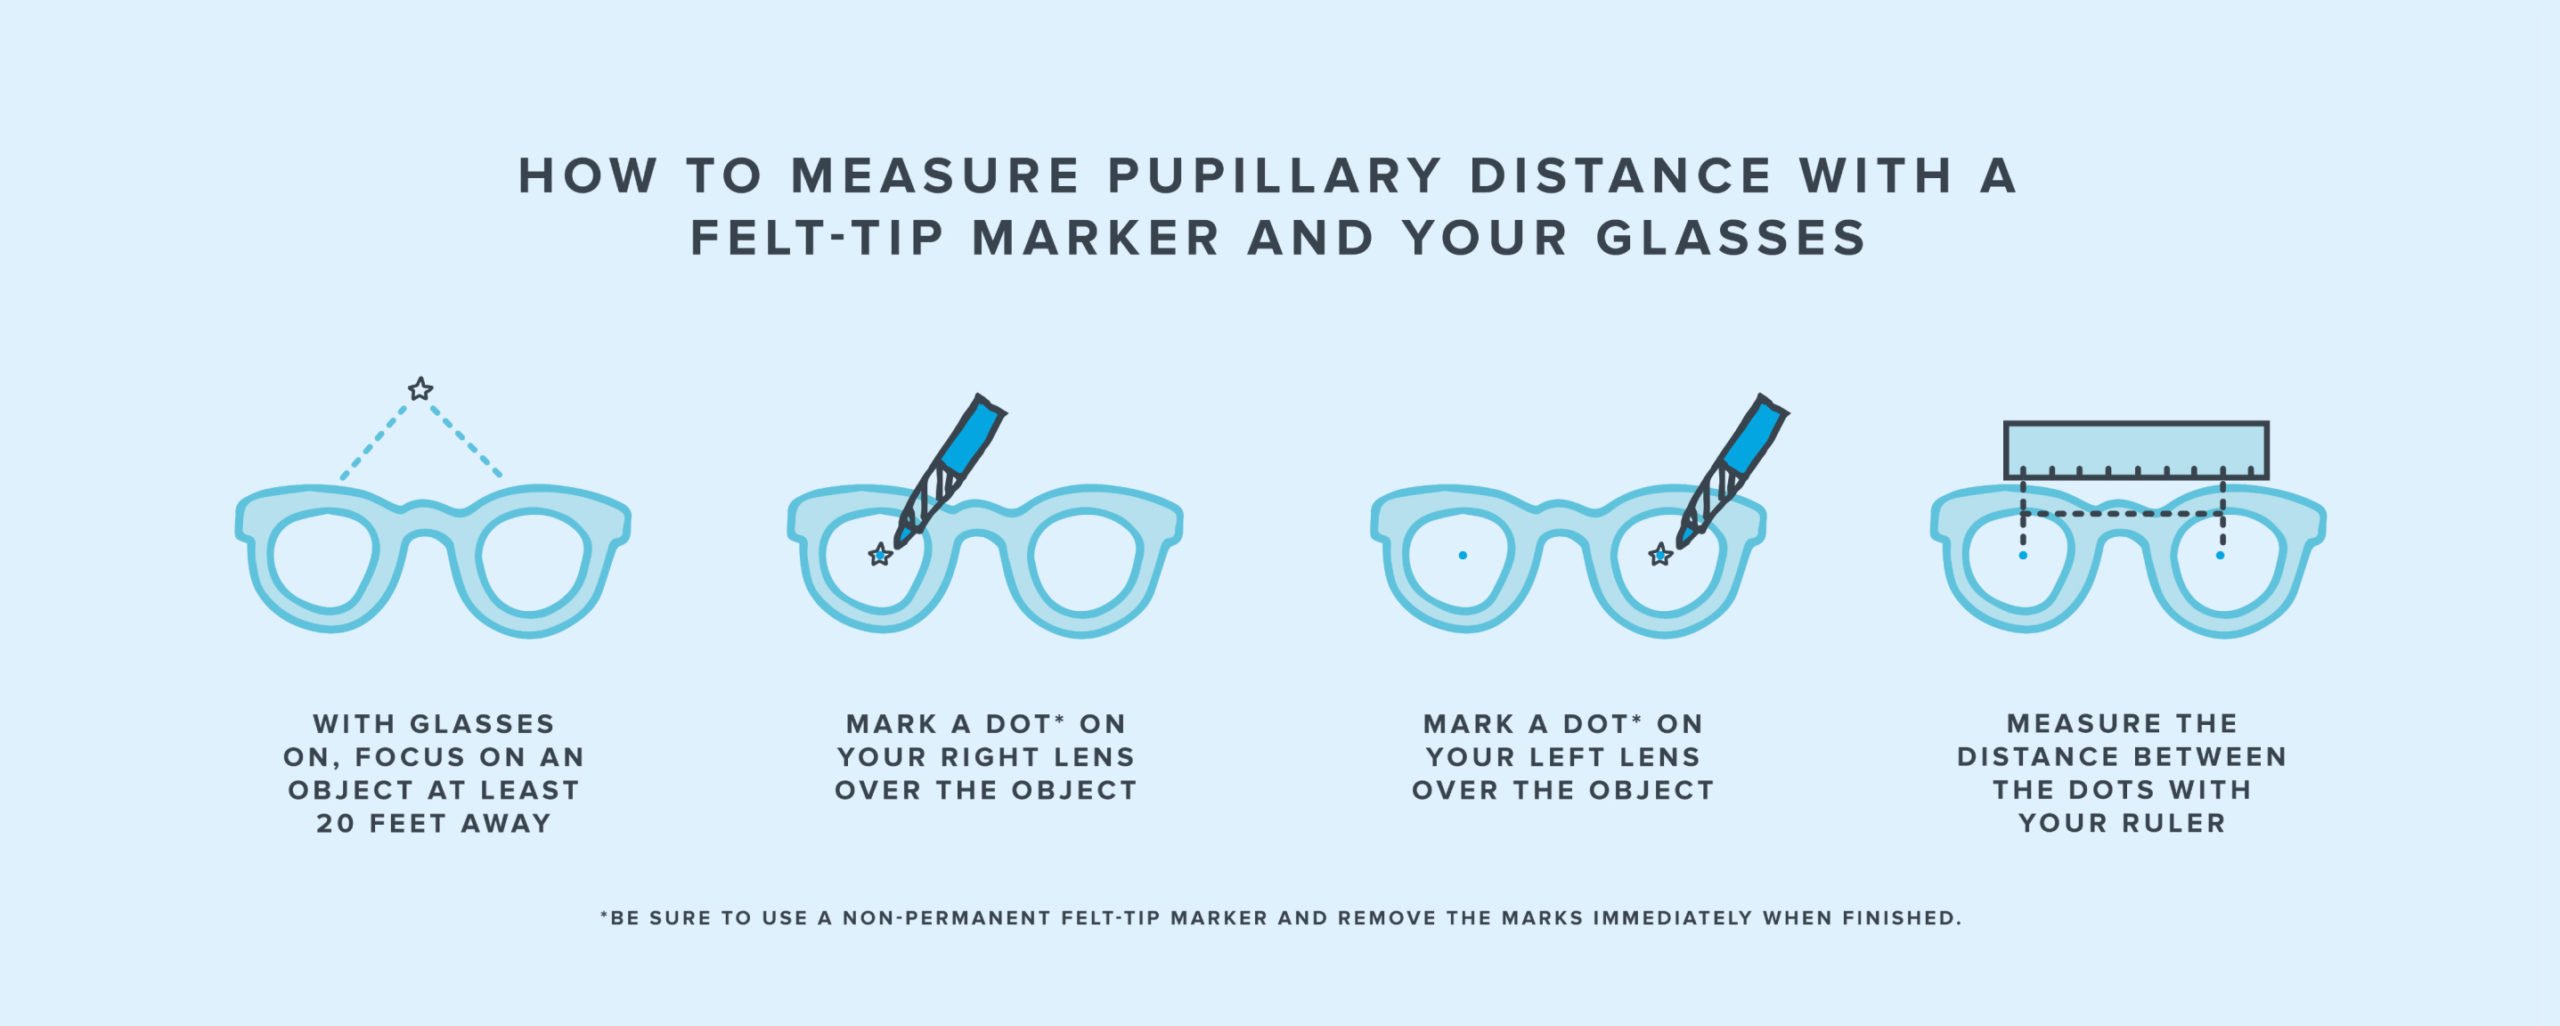 Infographic illustrating how to measure pupillary distance with a felt-tip marker and your glasses